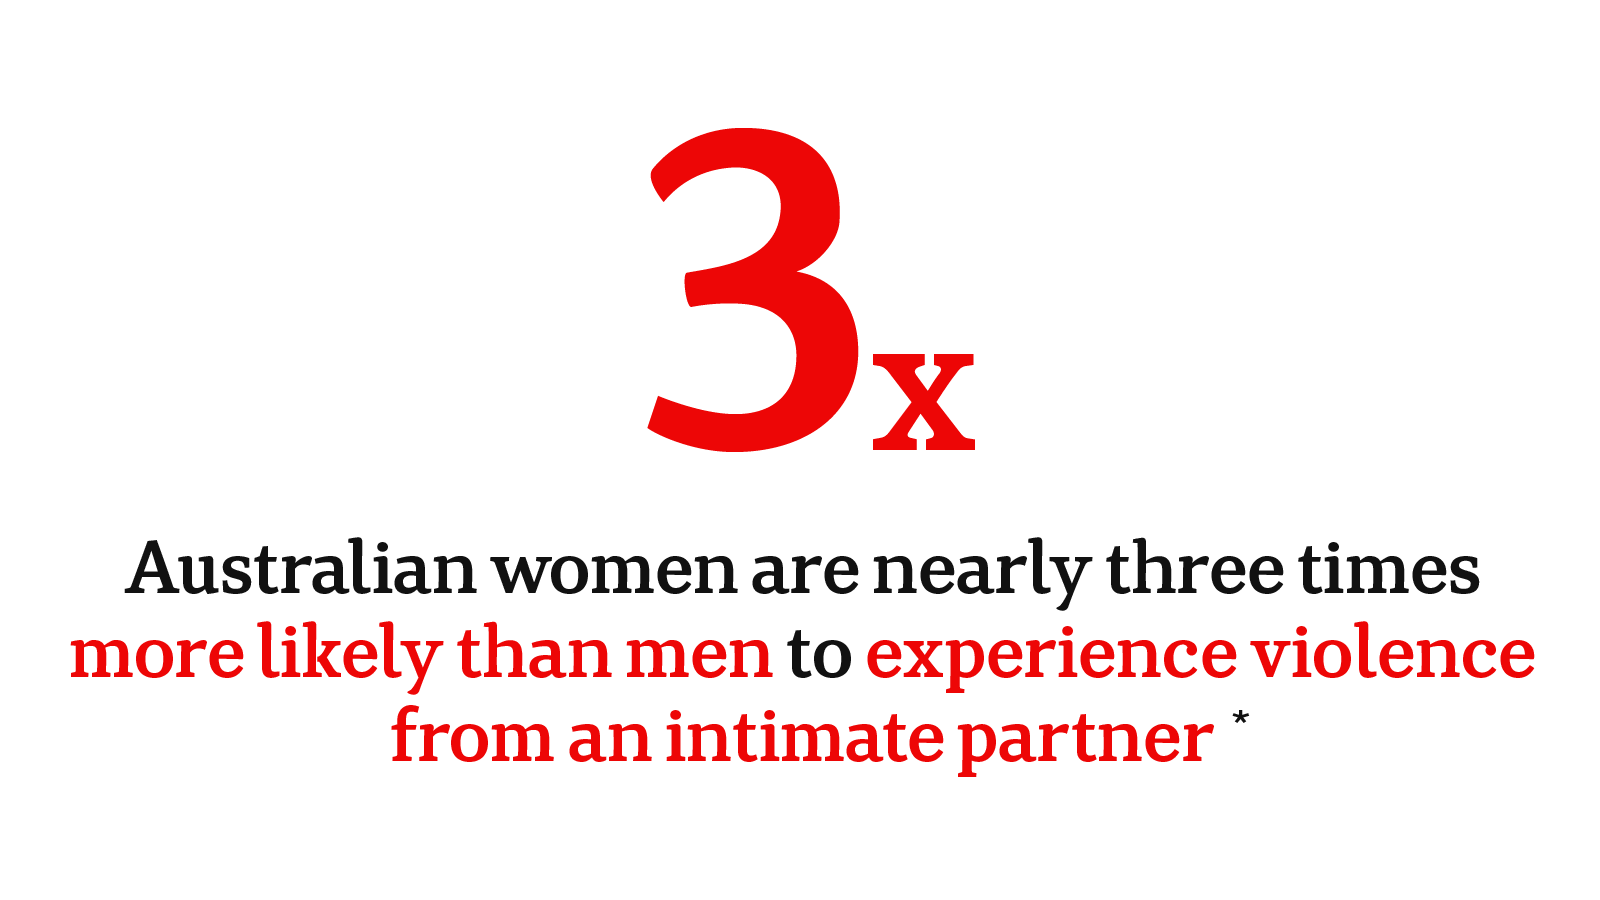 Australian women are 3 x more likely than men to experience violence from an intimate partner